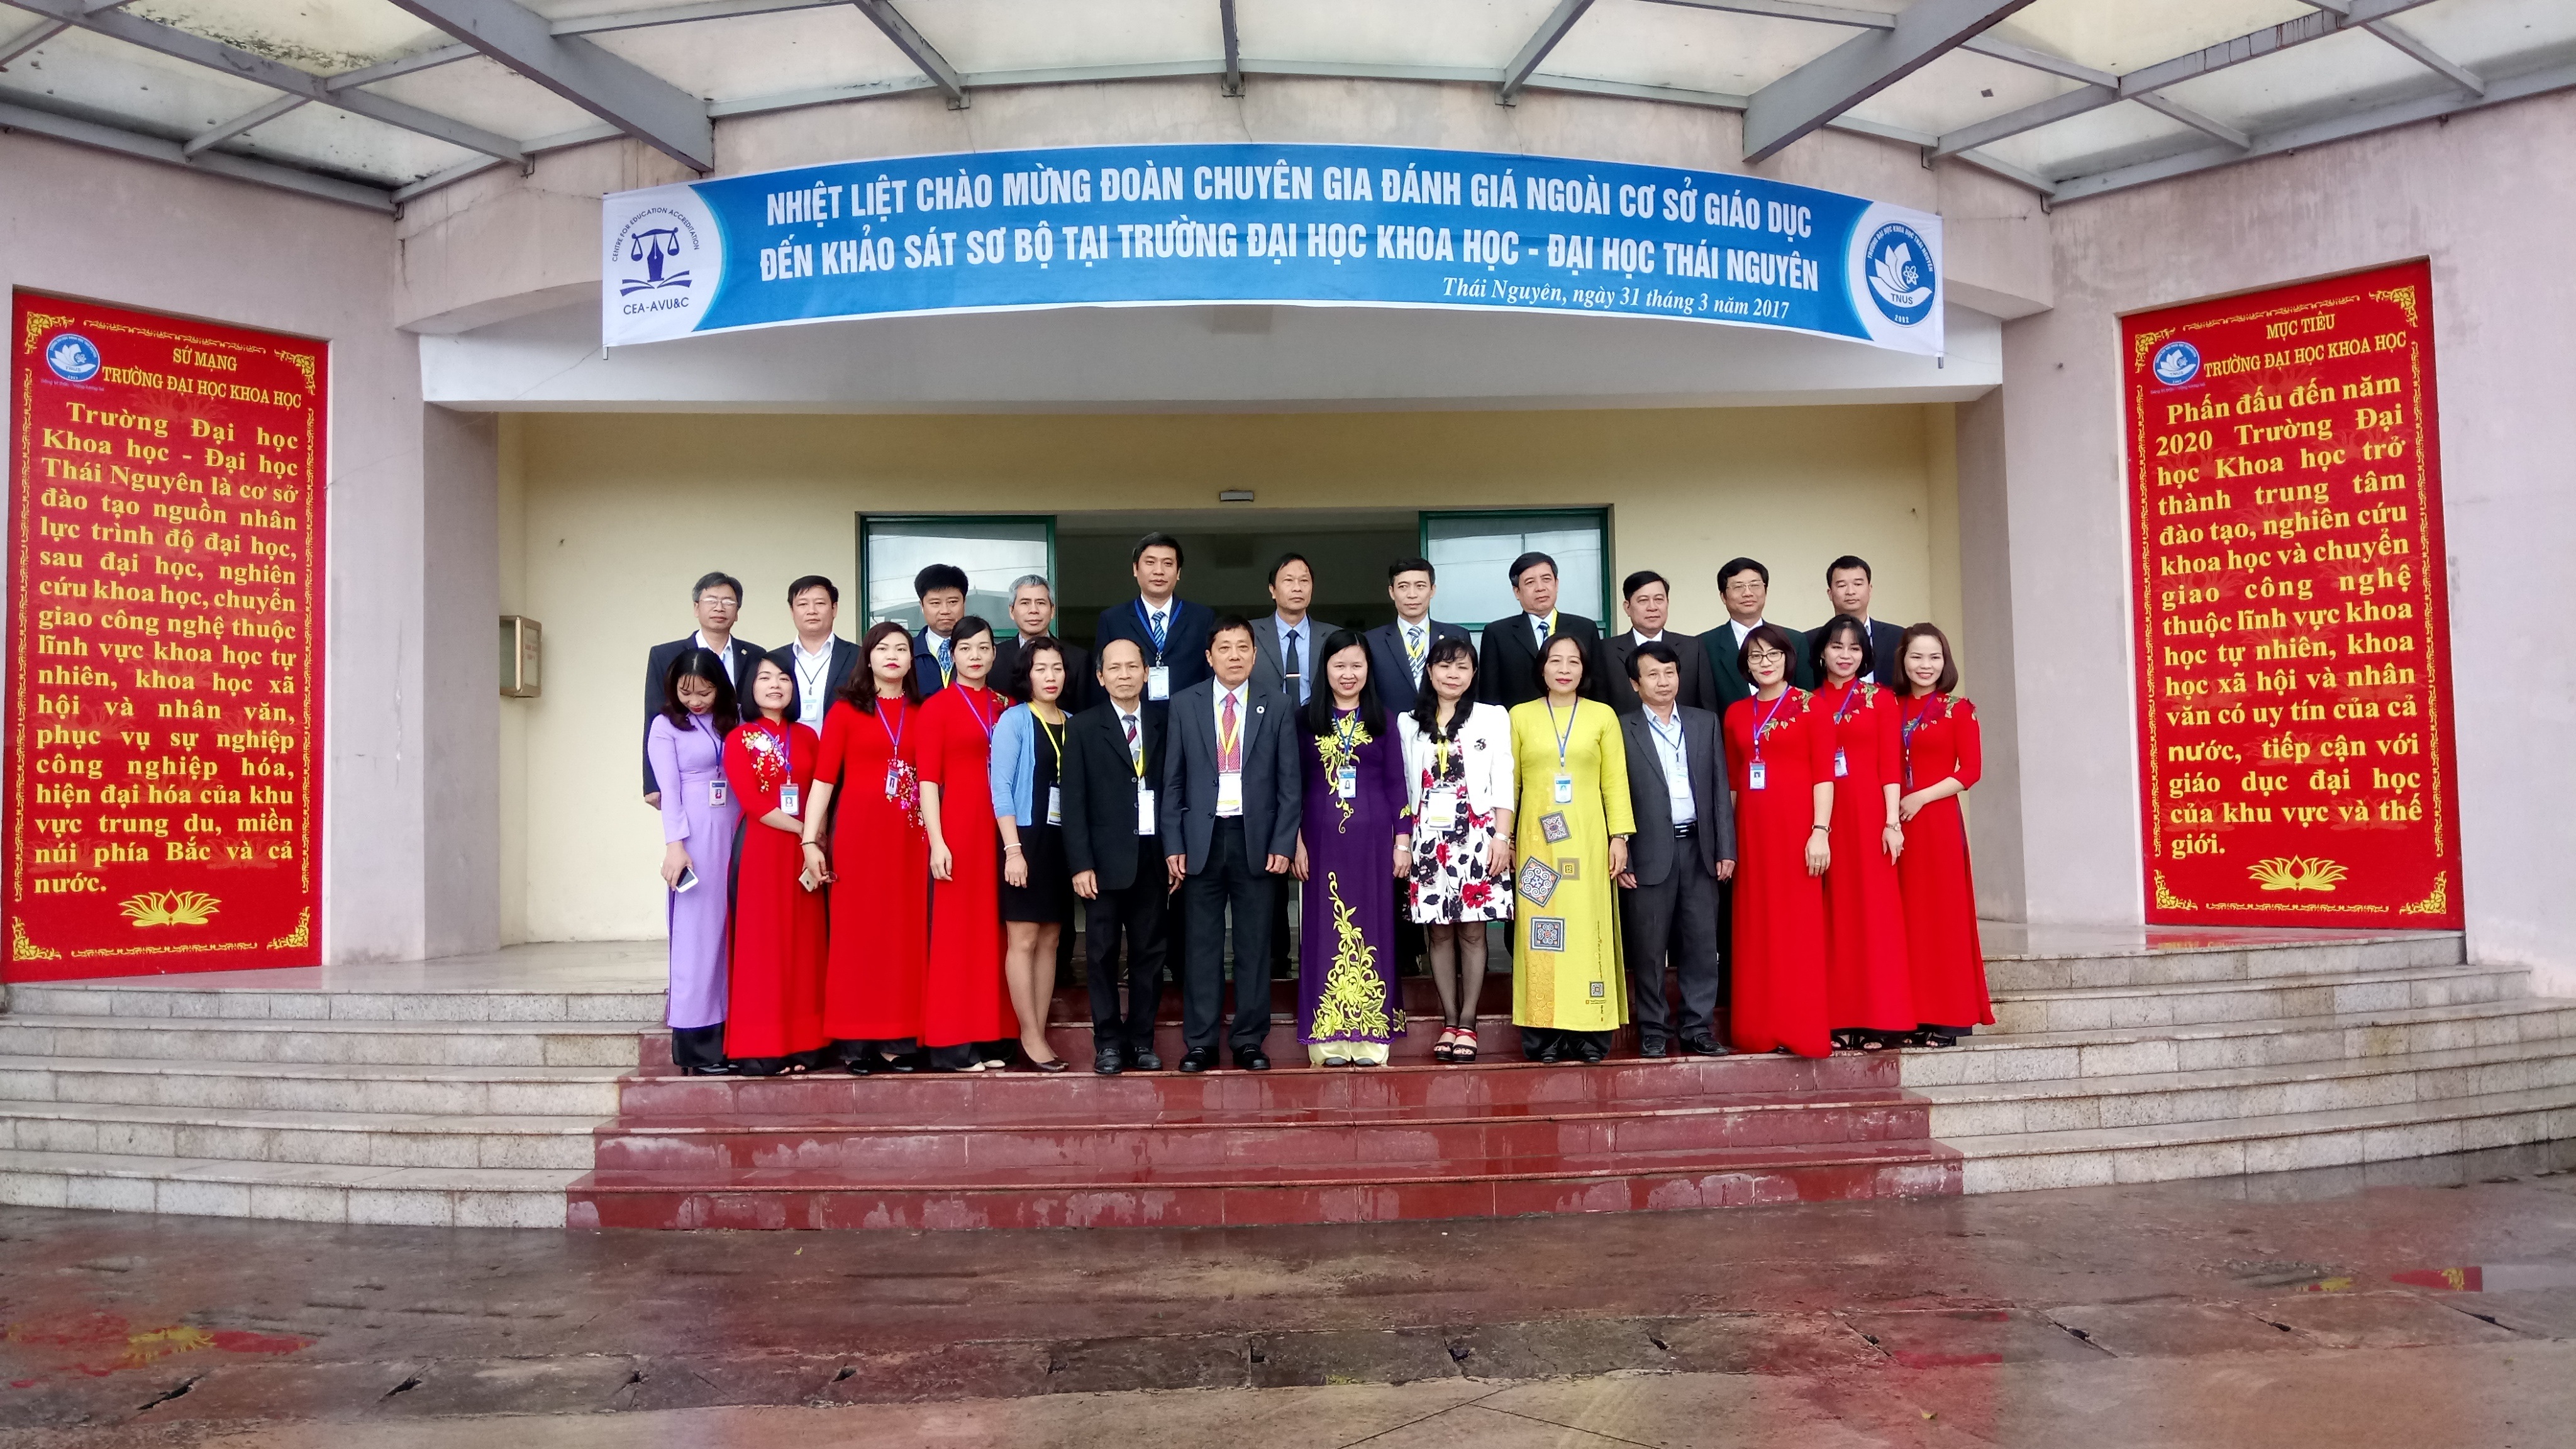 The Review Team and Leaders of Thai Nguyen University of Sciences together with University staff 